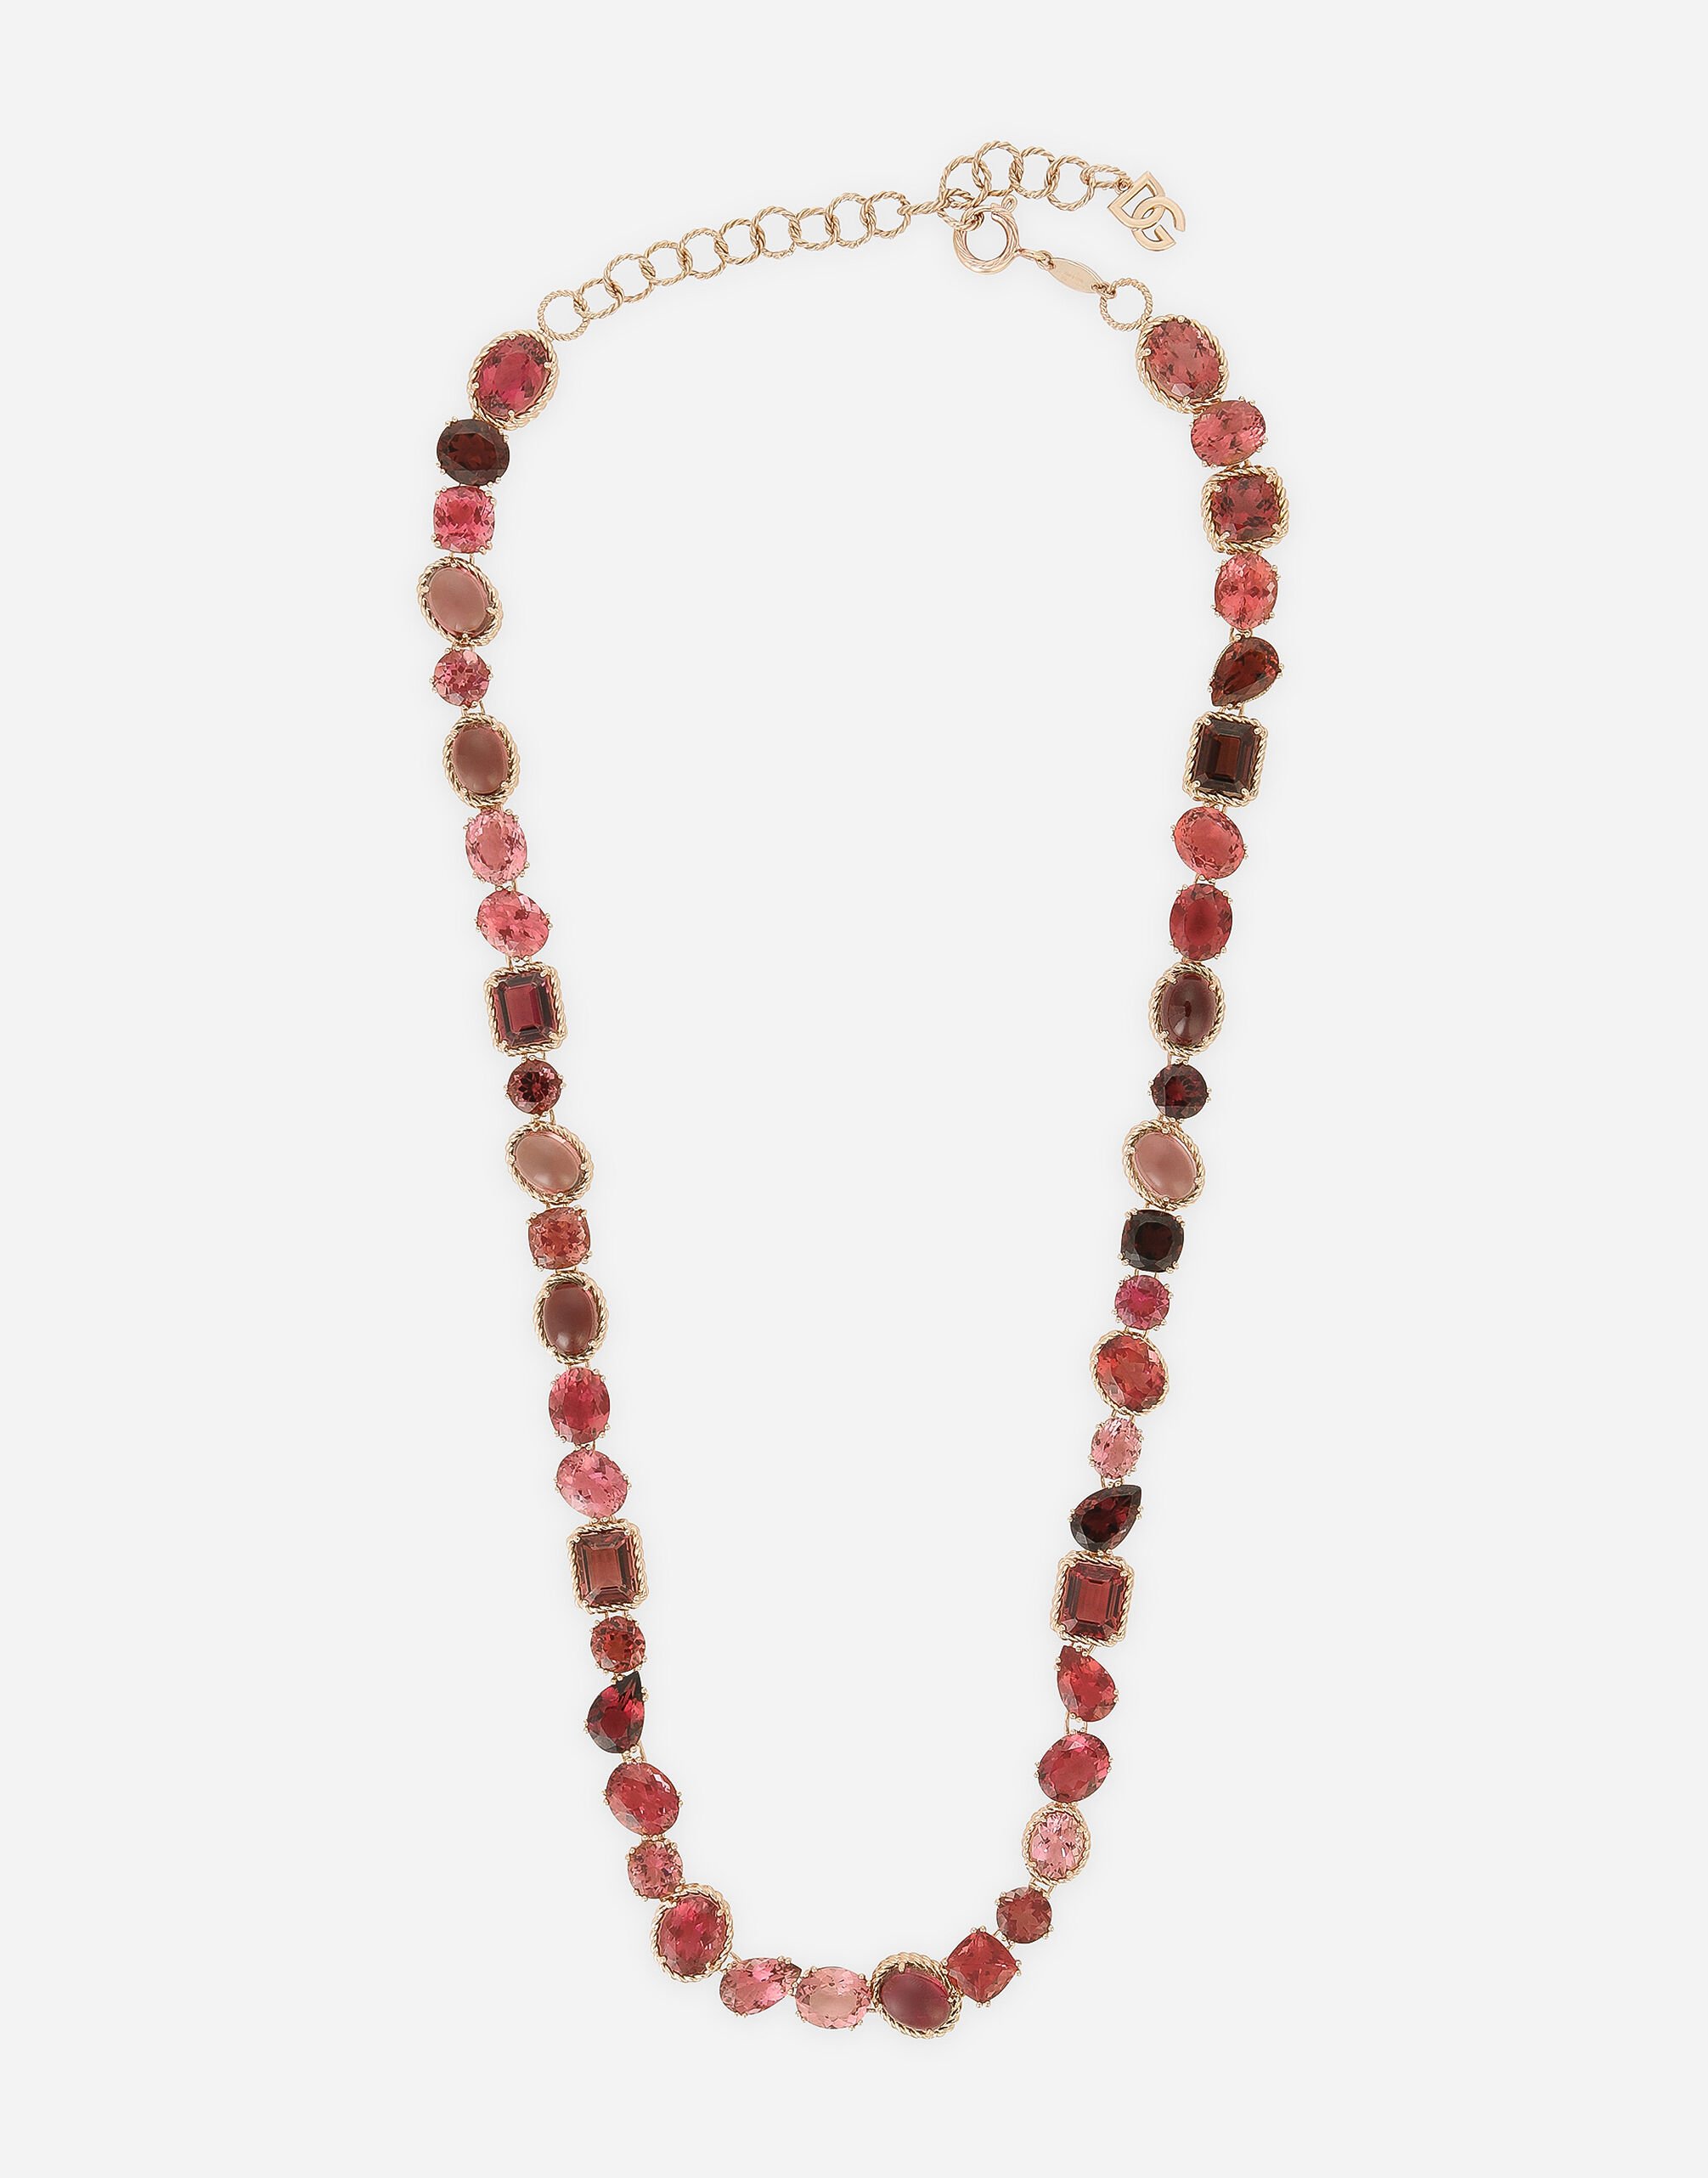 Dolce & Gabbana Anna necklace in red gold 18kt with toumalines Gold WNQA3GWQC01